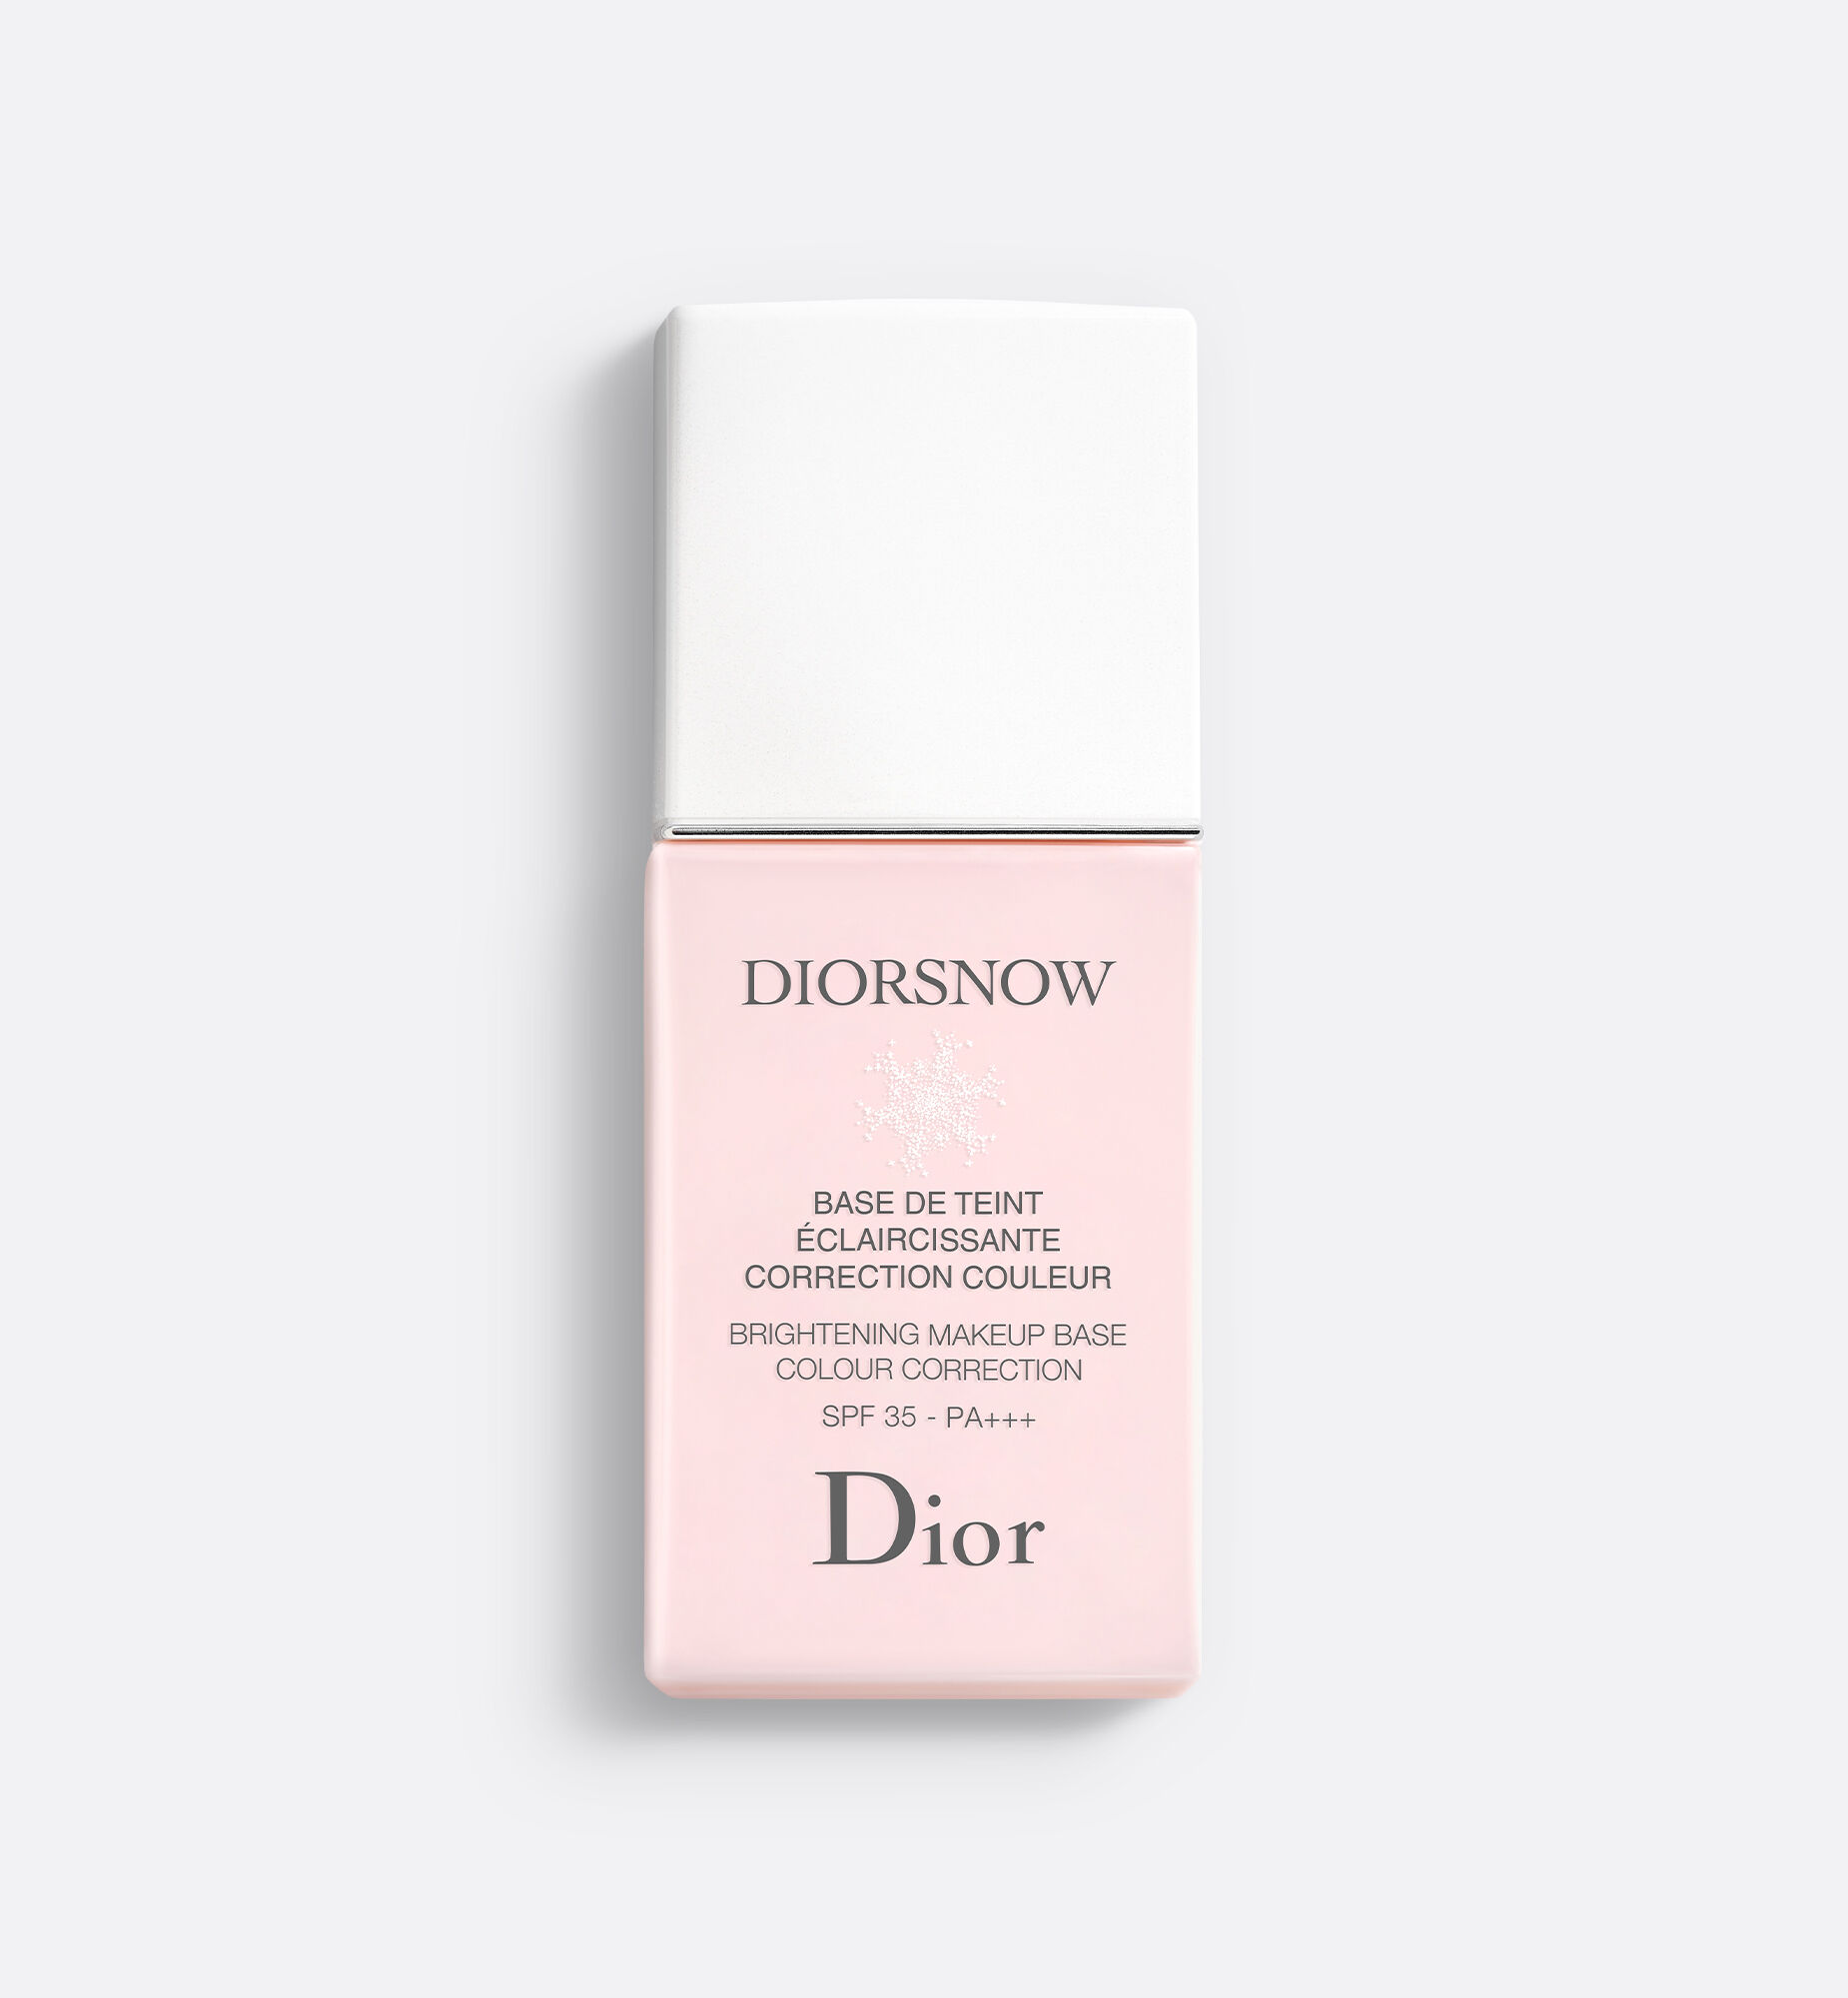 Diorsnow White Reveal Perfecting Makeup Base Review  cappuccinos and  biscottis